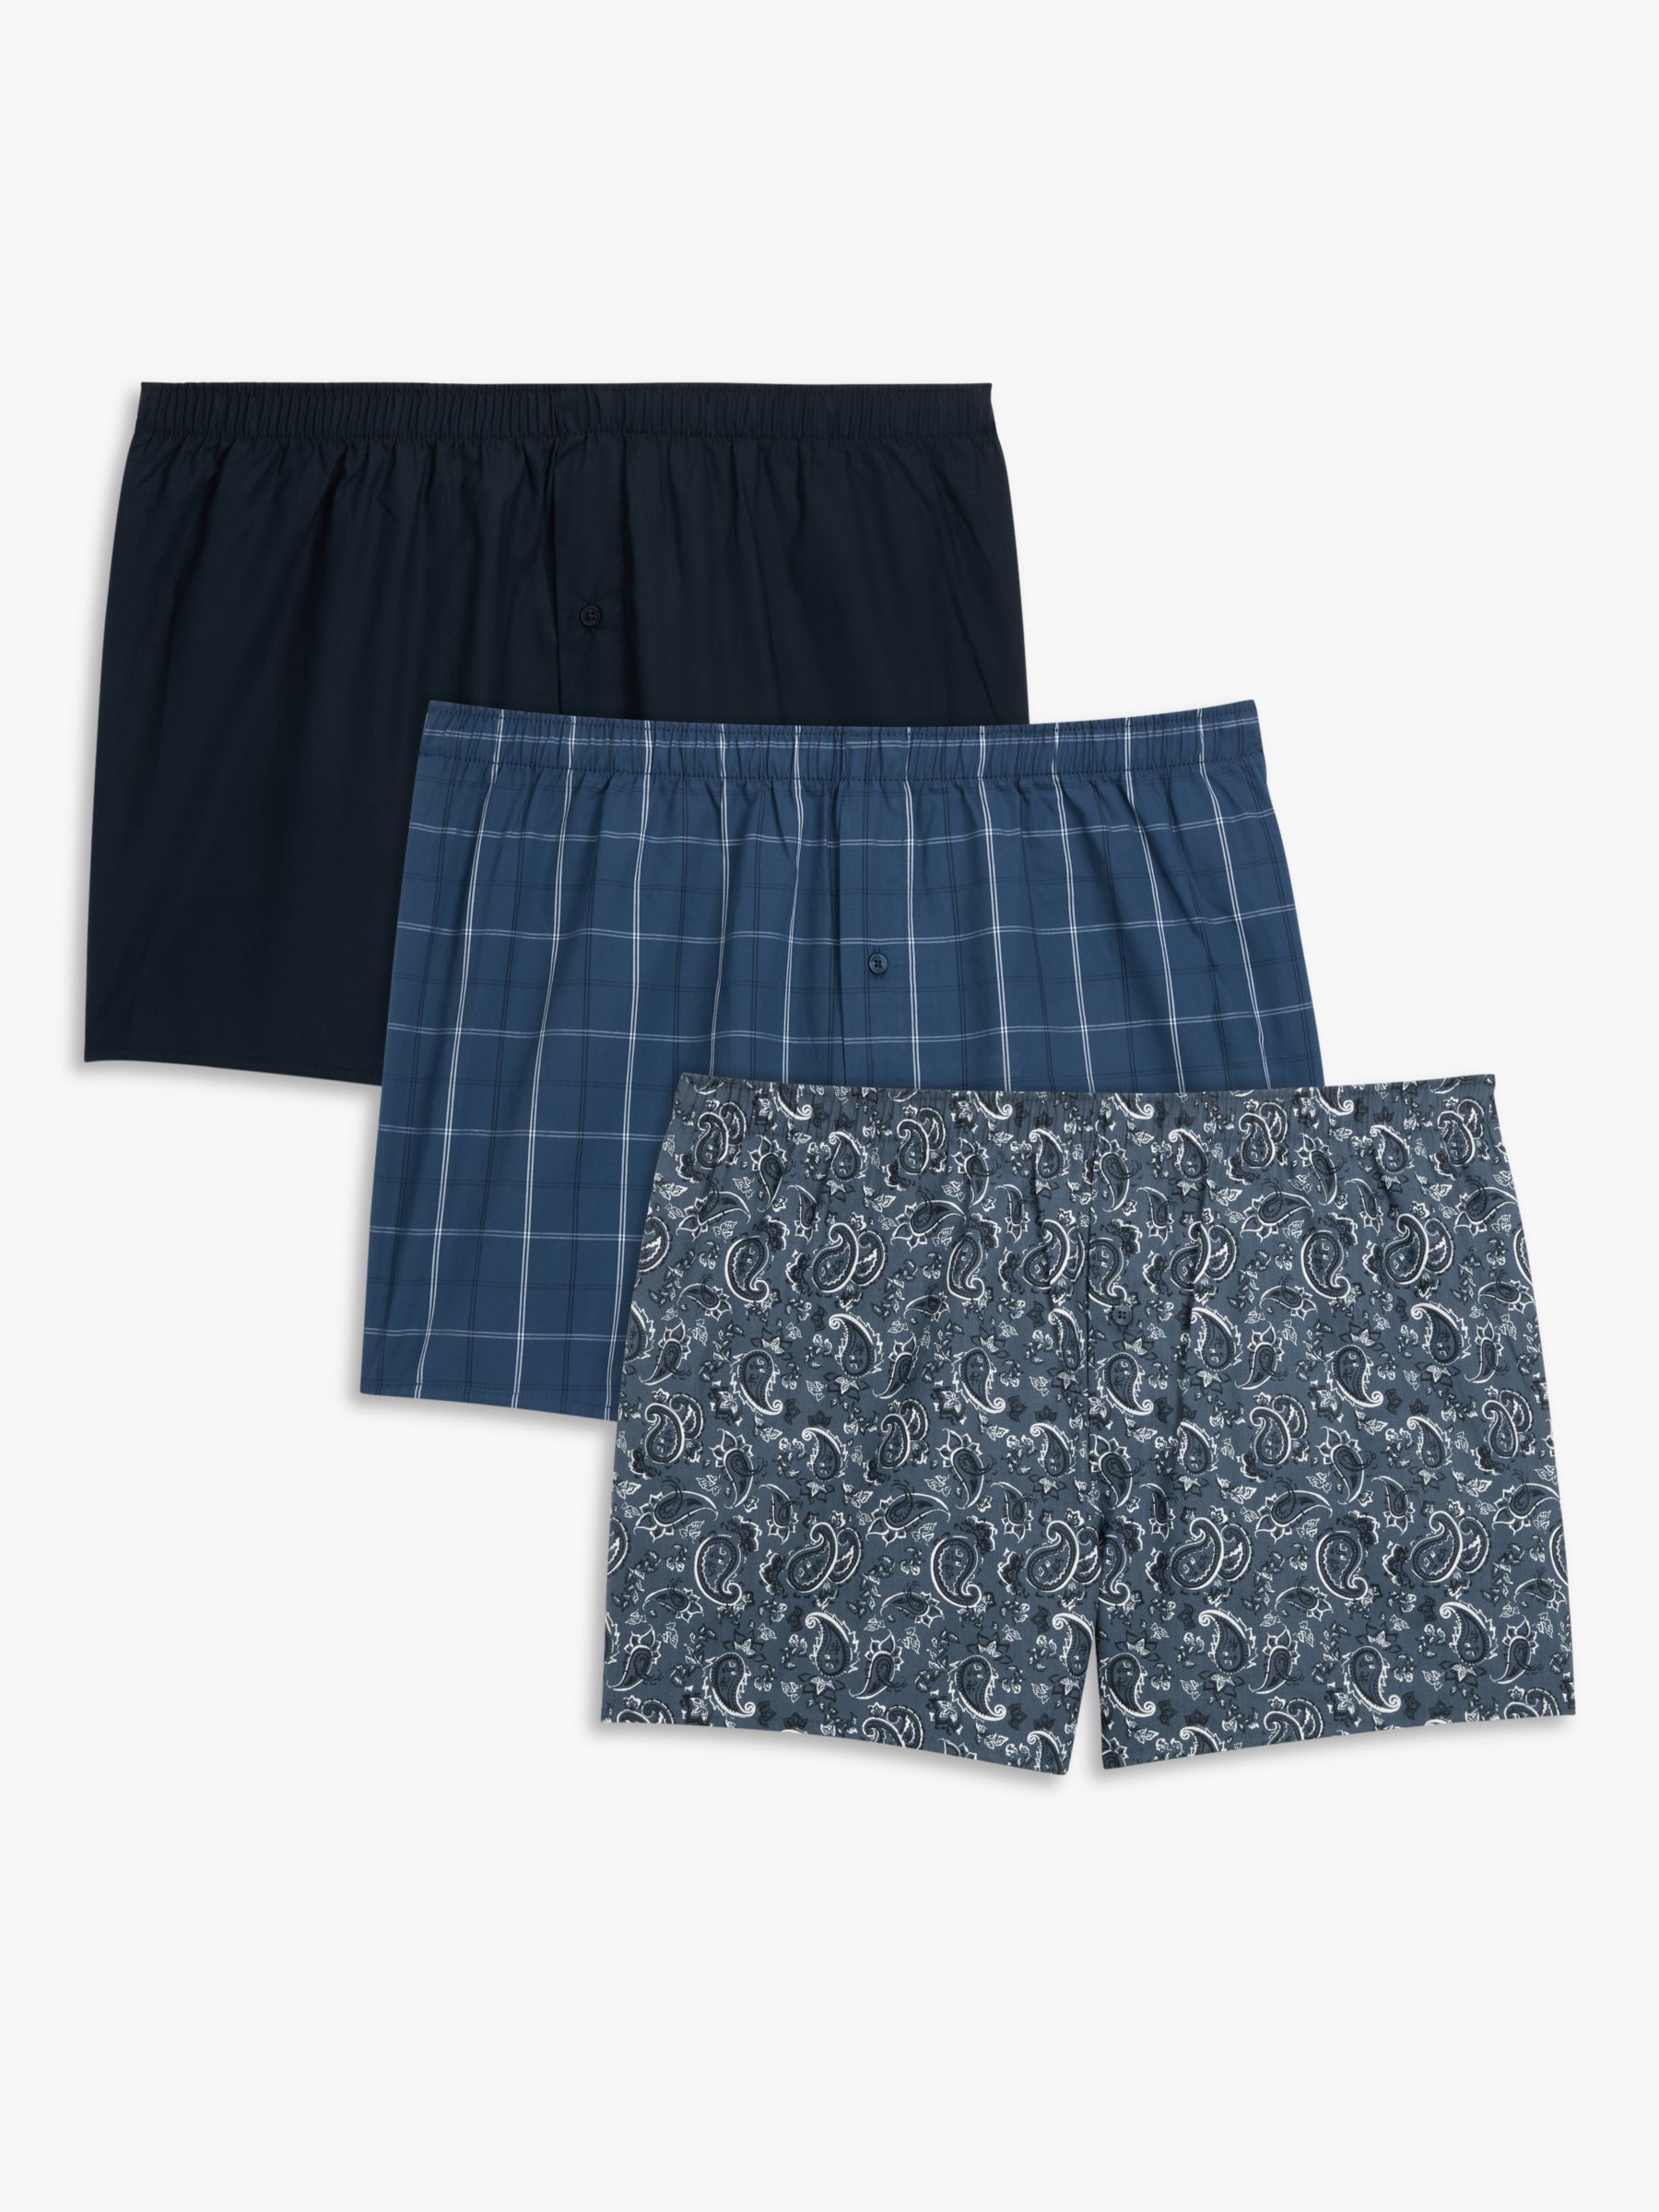 Checked Woven Boxers